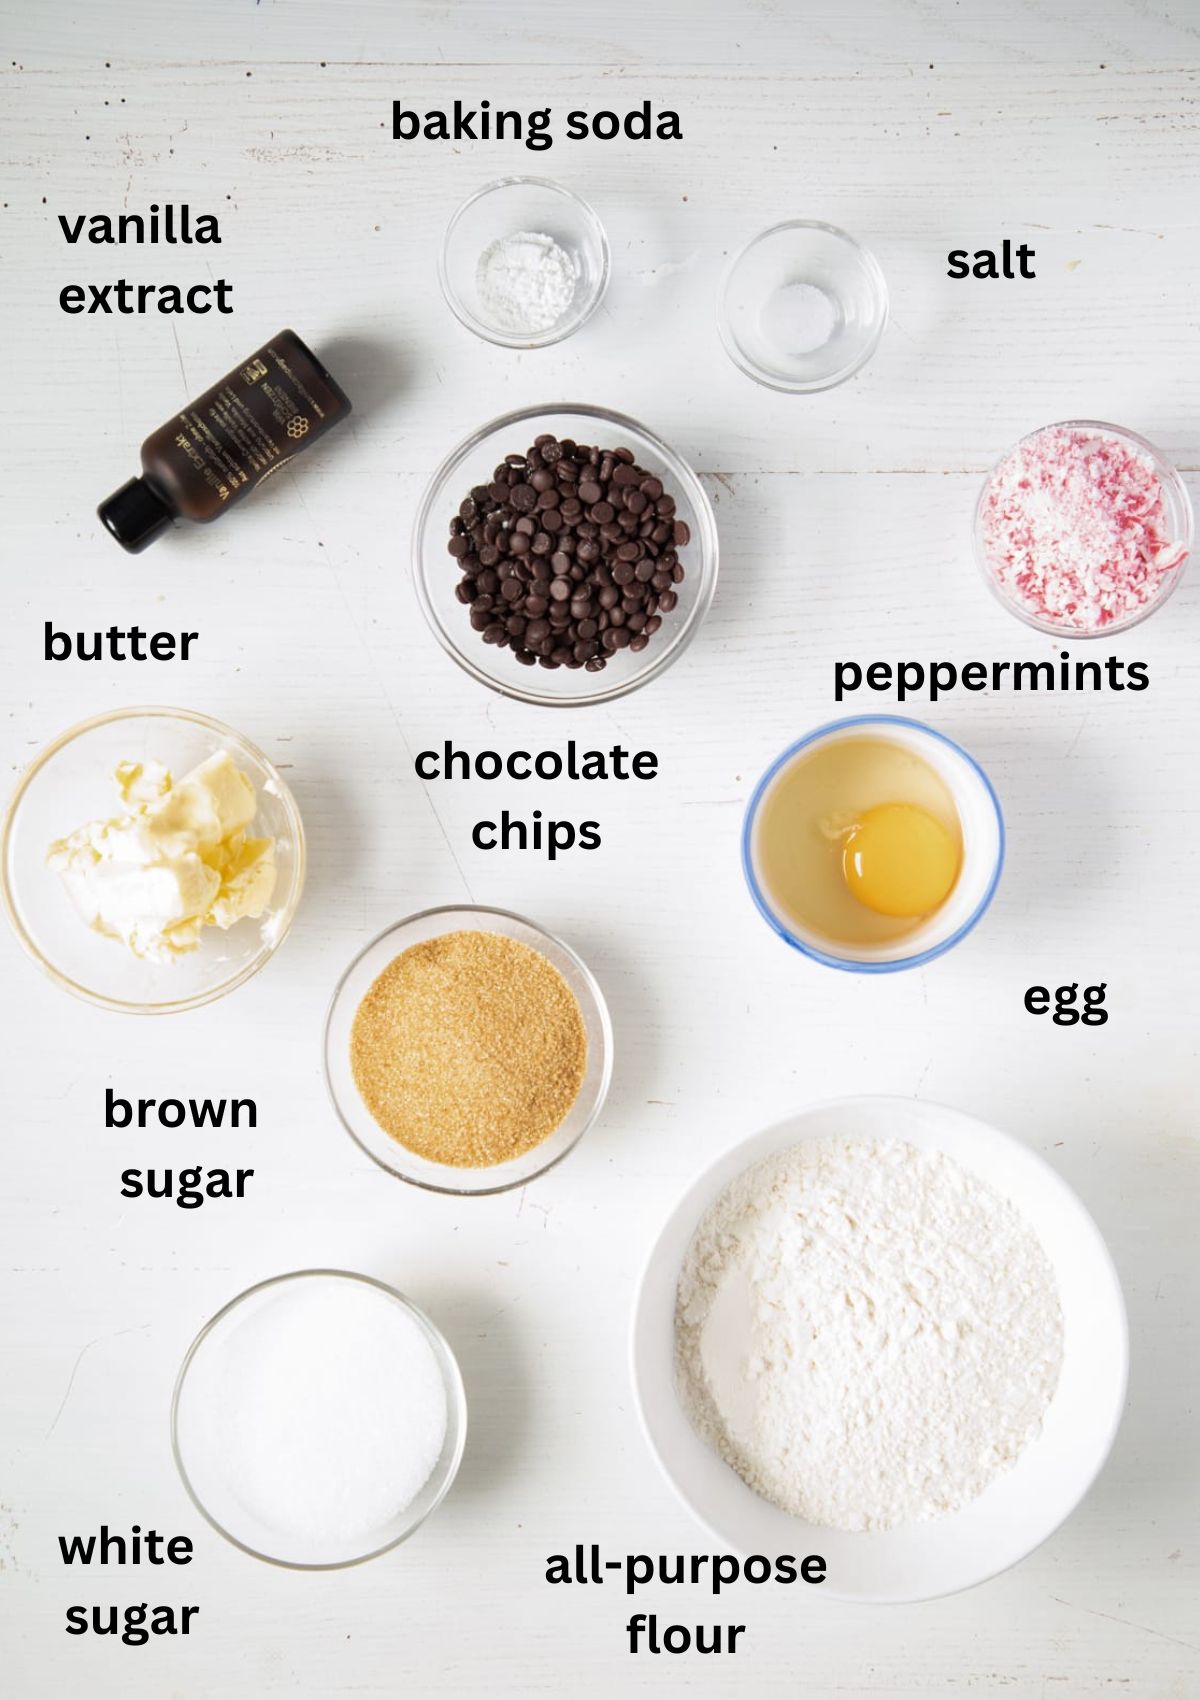 listed ingredients for making cookies with chocolate chips and crushed peppermint.